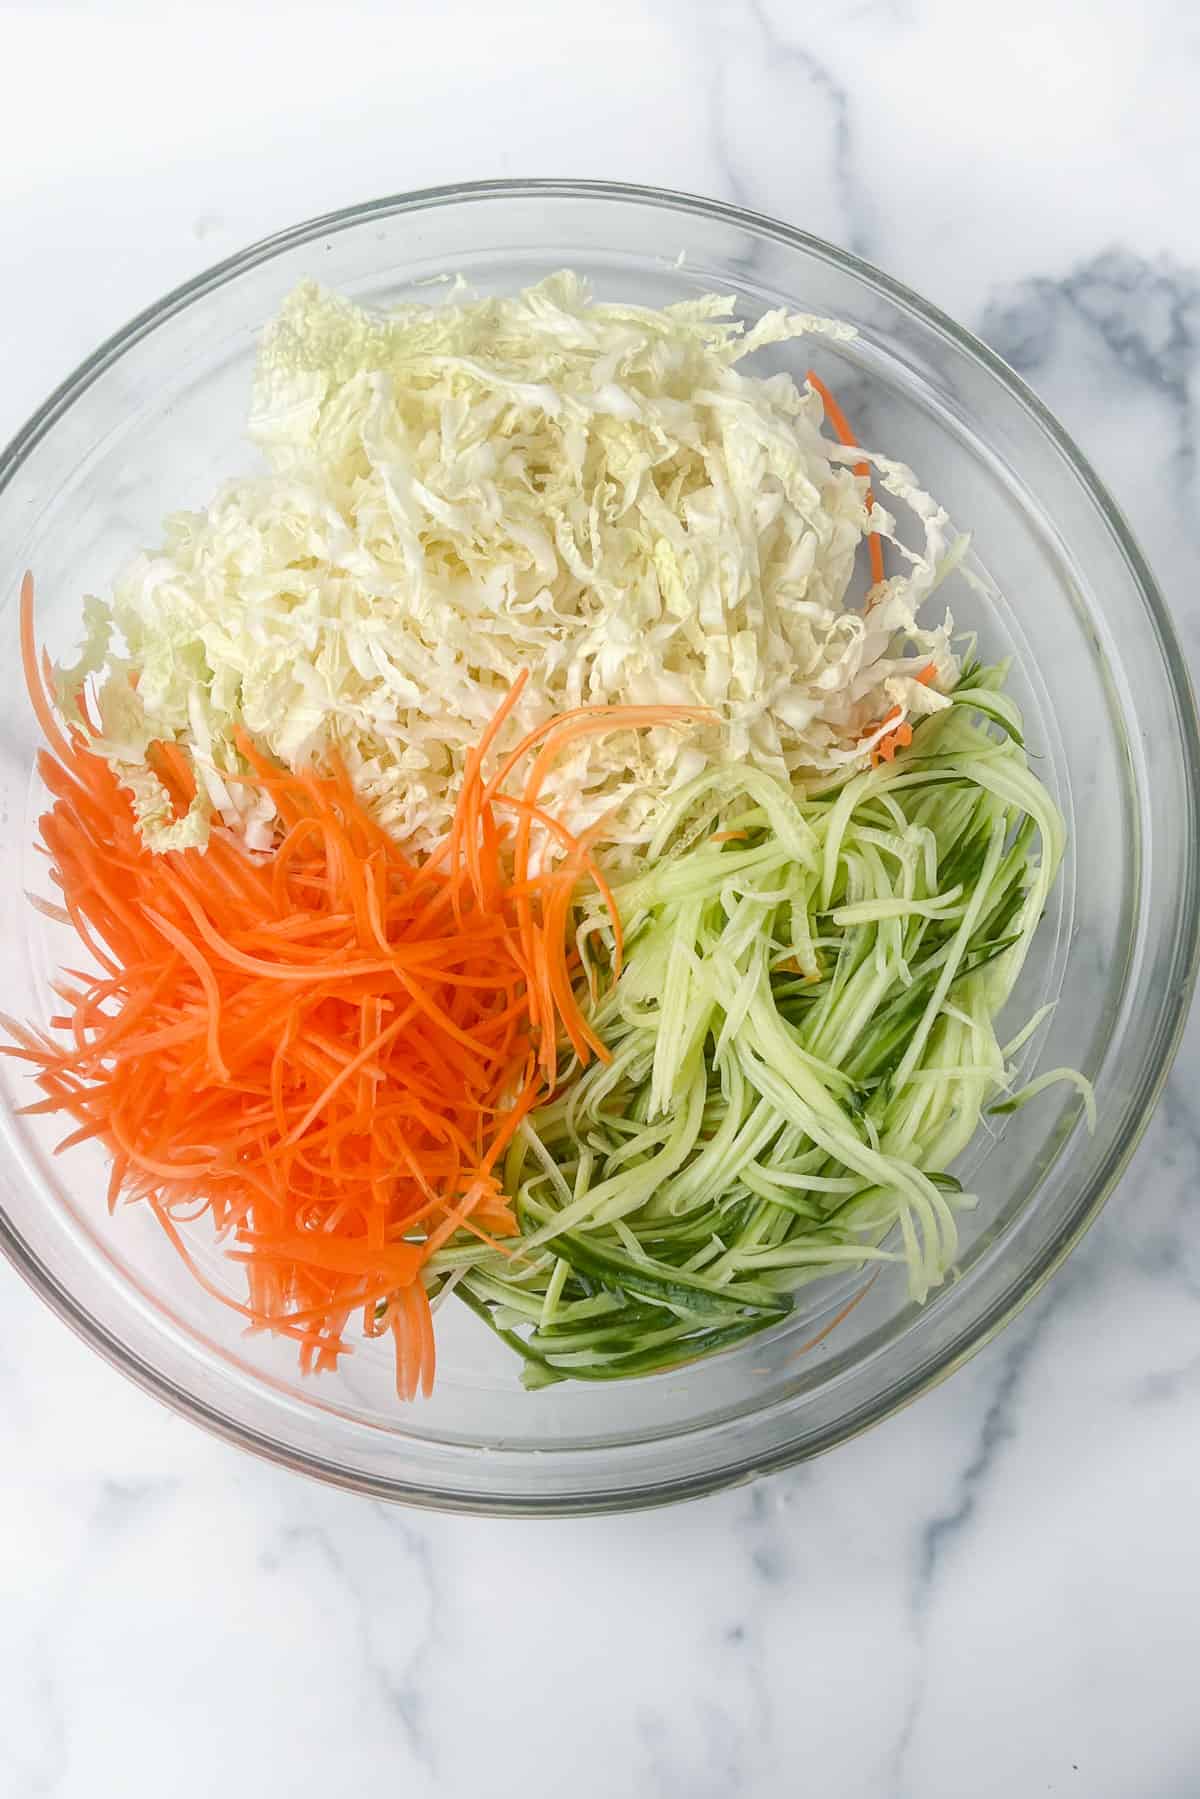 Glass bowl with a pile of shredded carrots, pile of shredded napa cabbage and pile of shredded cucumbers.